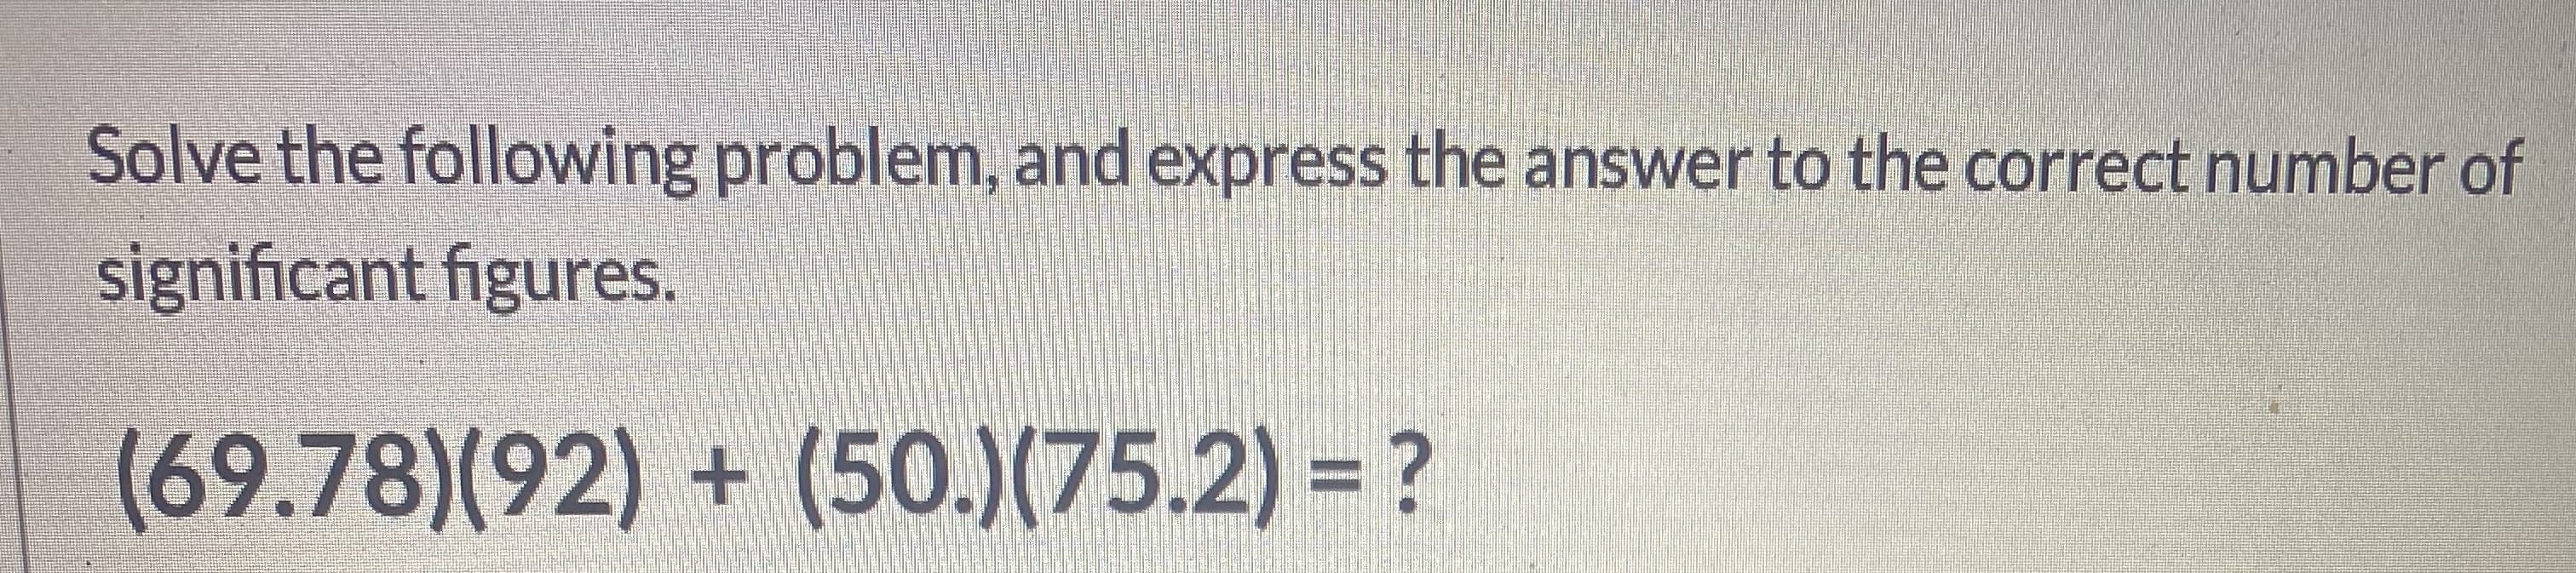 Solve the following problem, and express the answer to the correct number of
significant figures.
(69.78)(92) + (50.)(75.2) = ?
